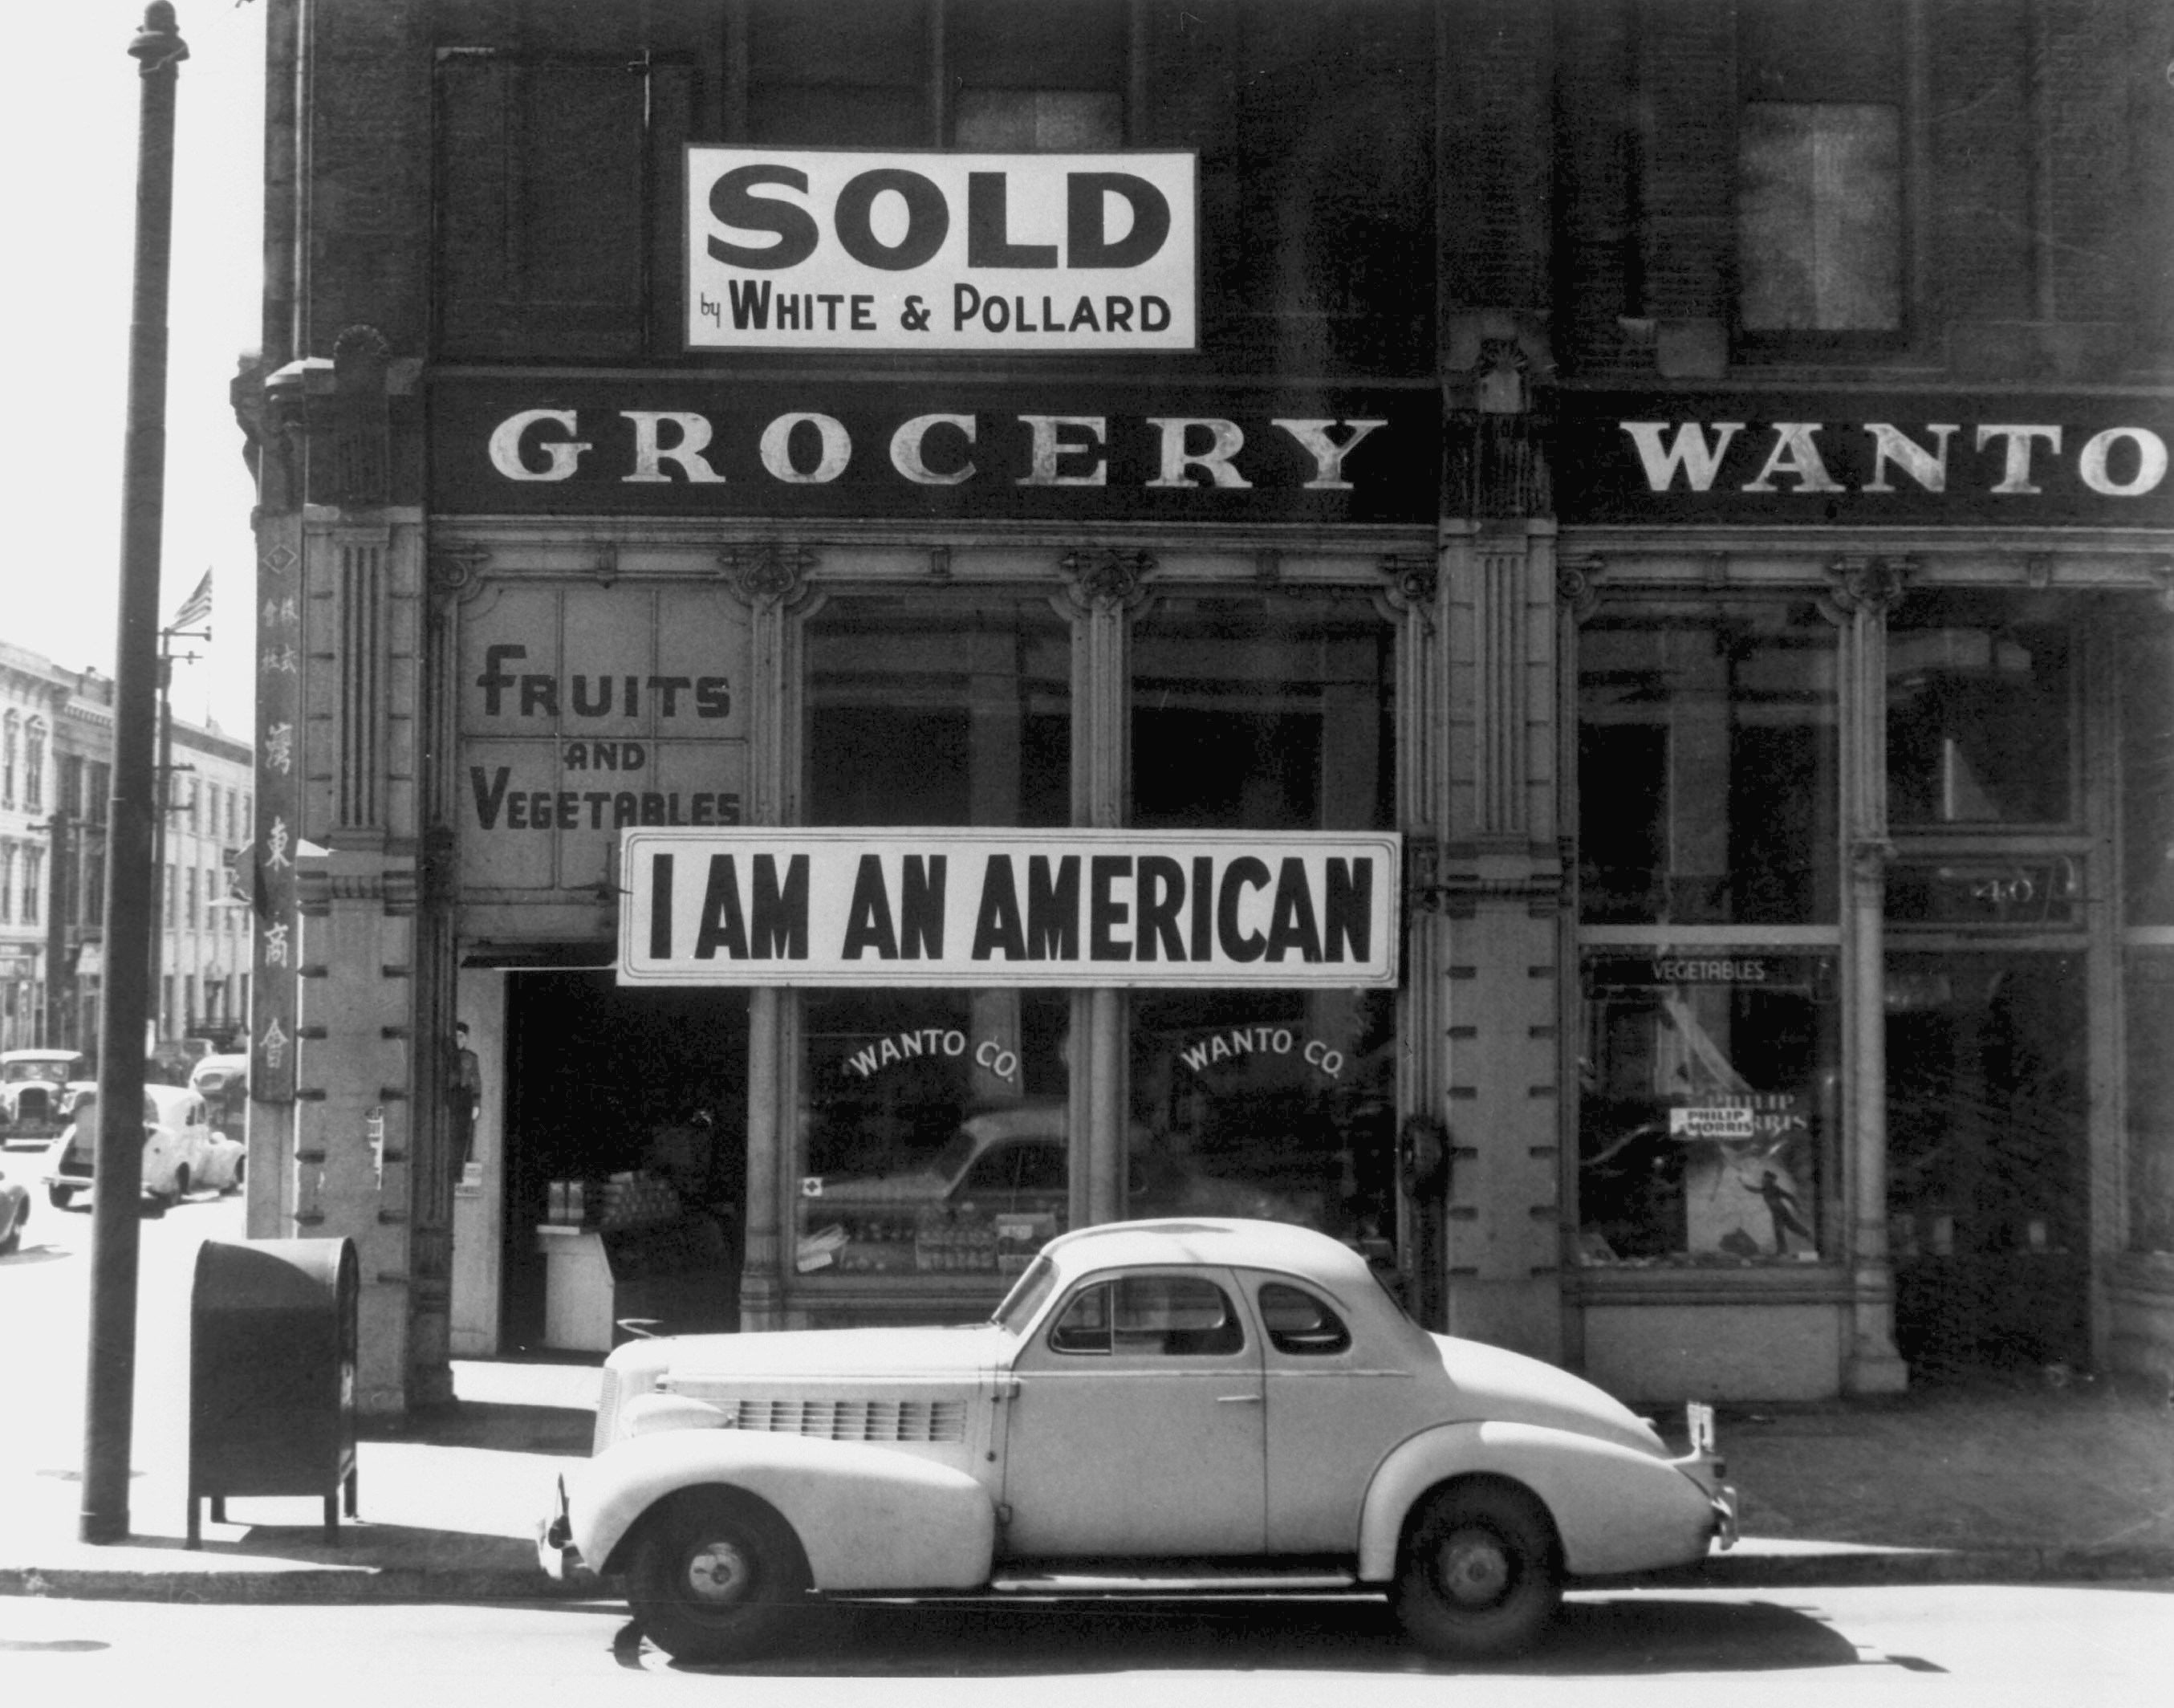 Following evacuation orders, this store was closed. The owner, a University of California graduate of Japanese descent, placed the "I AM AN AMERICAN" sign on the store front the day after Pearl Harbor. Oakland, CA, April 1942. Dorothea Lange. 